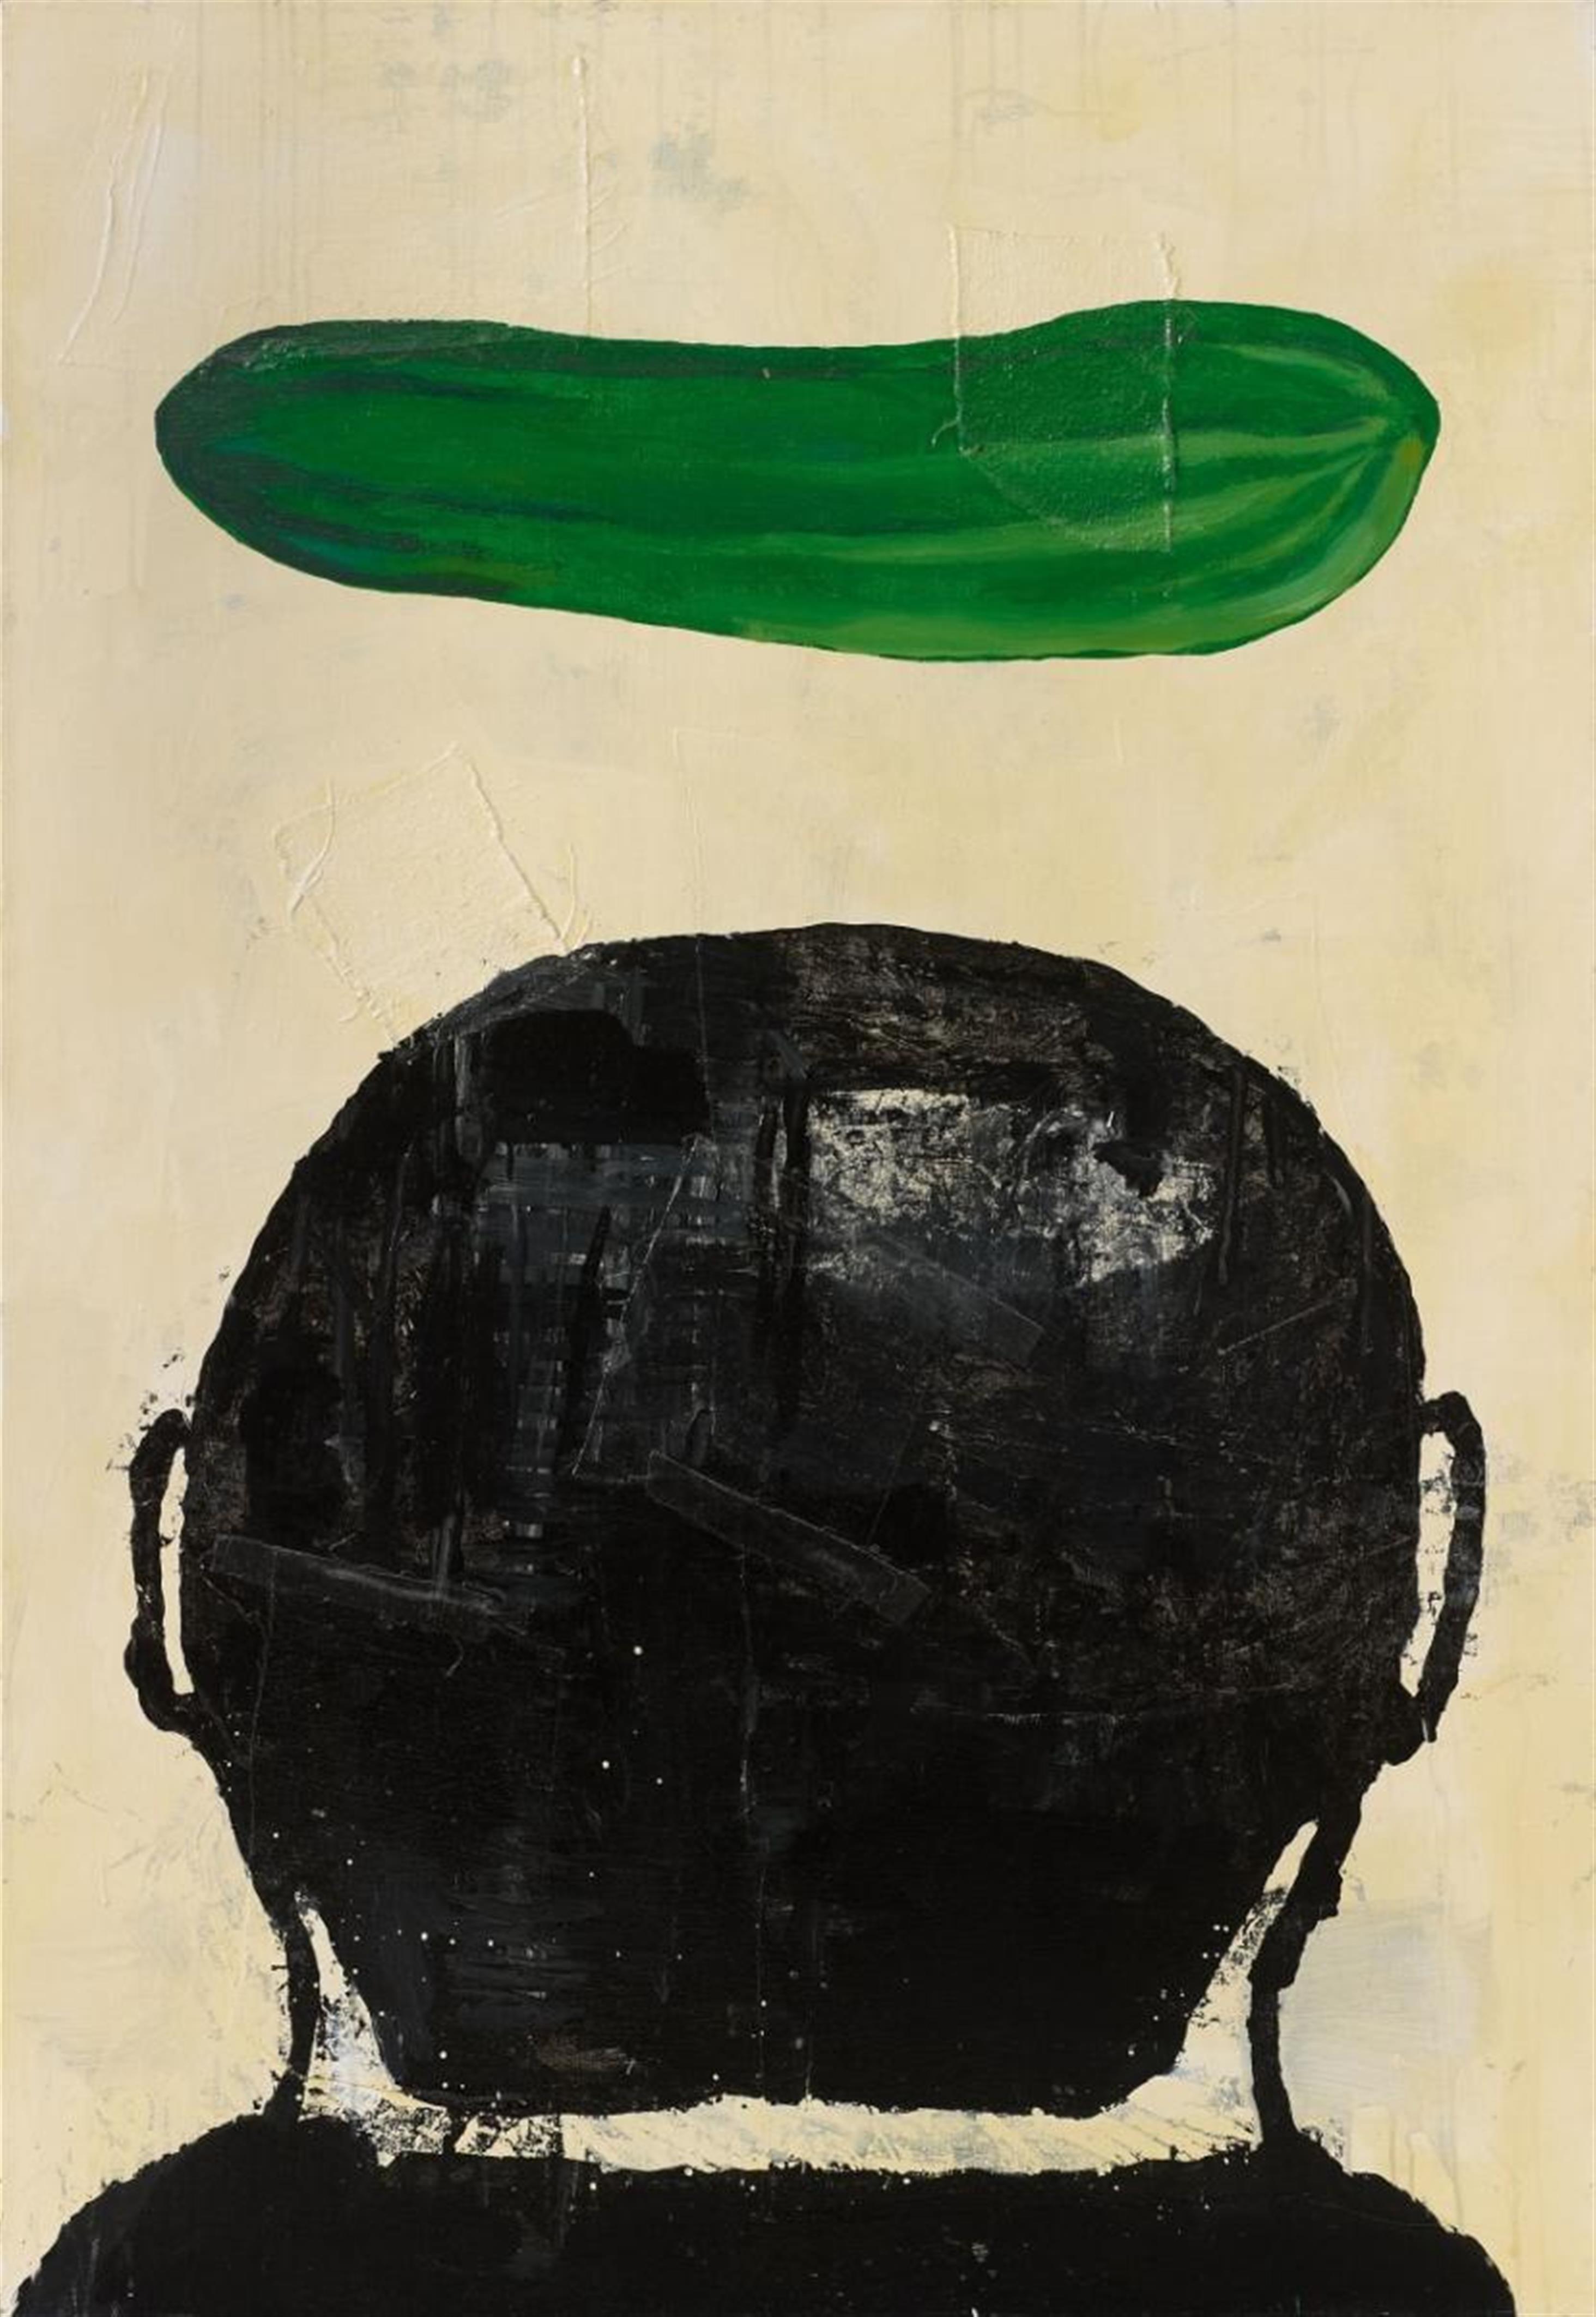 Donald Baechler - Untitled (Composition with cucumber)